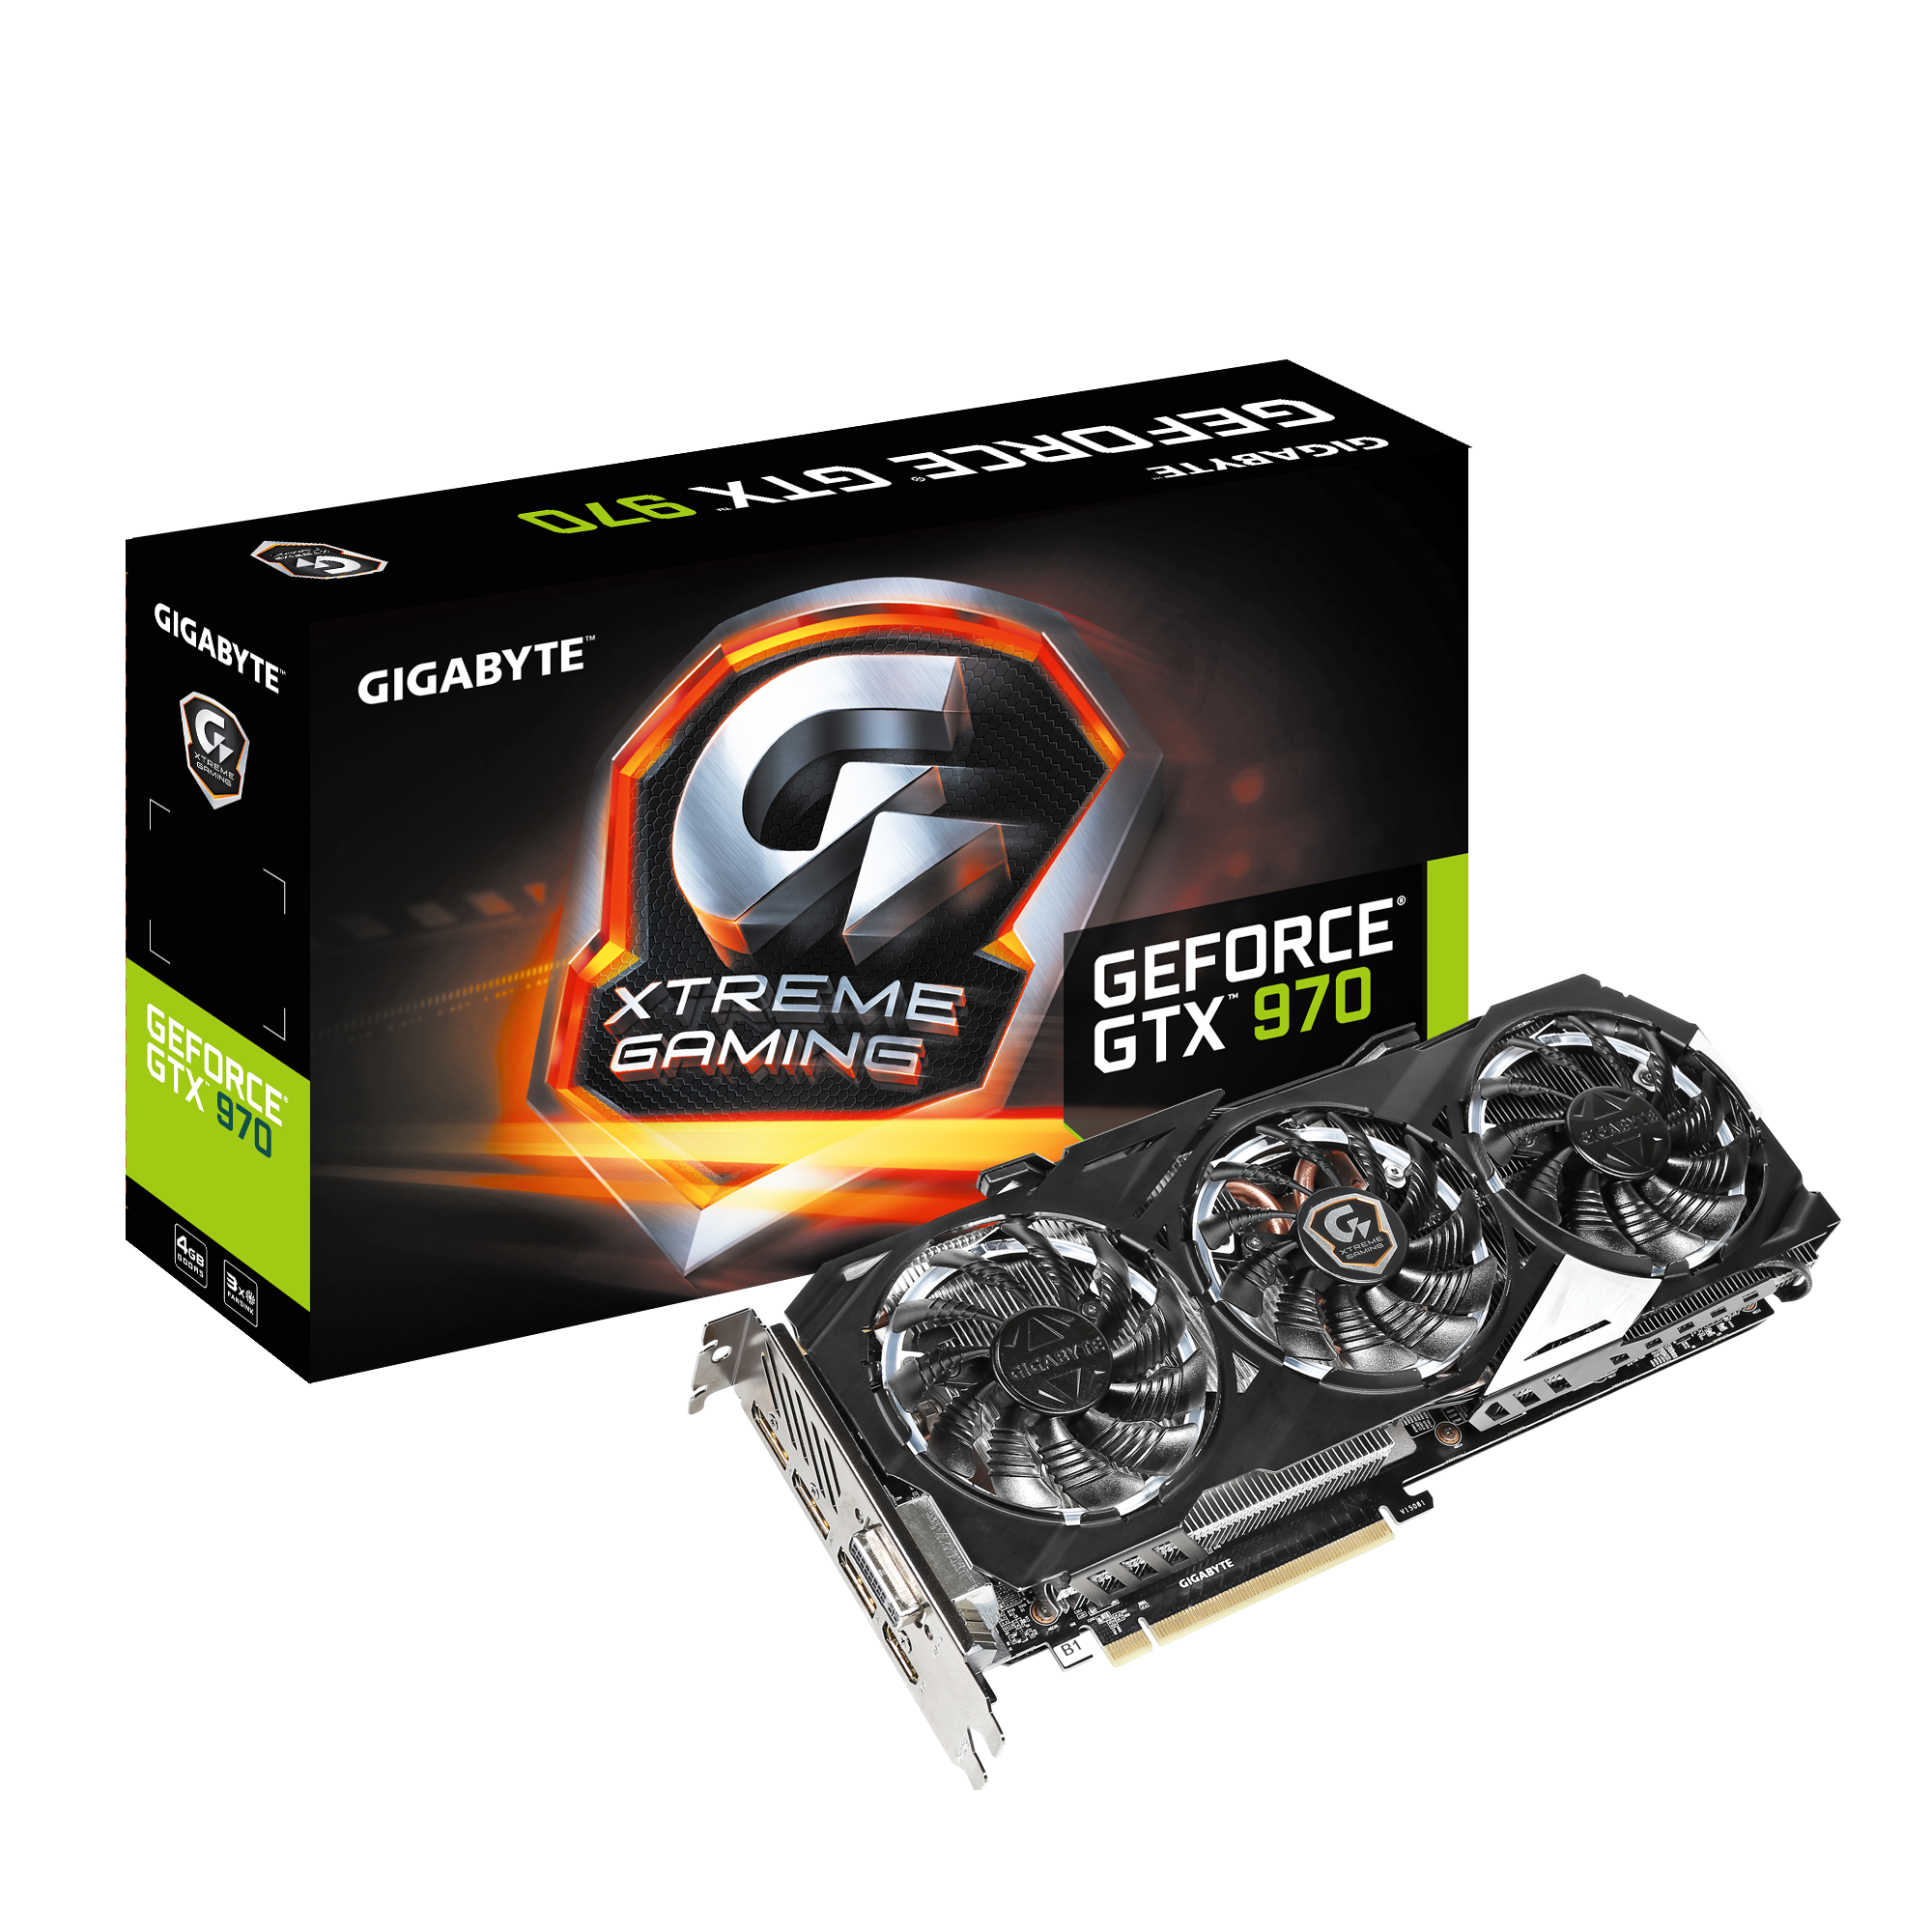 GV-N970XTREME-4GD Key Features | Graphics Card - GIGABYTE Global